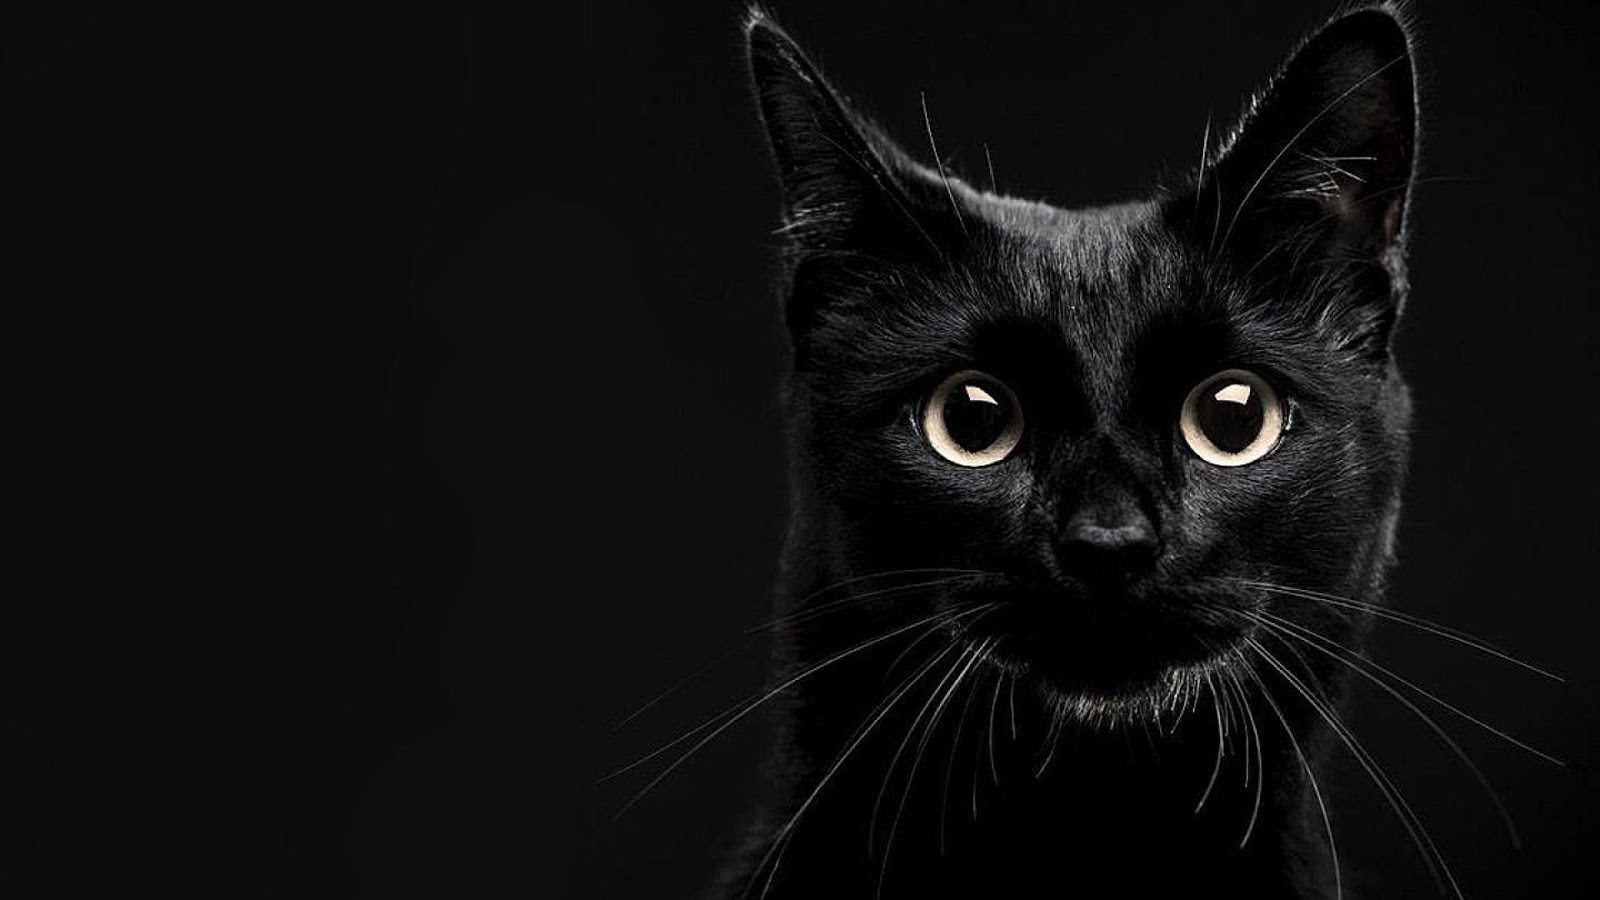 Black Cat Wallpaper Hd High Quality Desktop Iphone And Android Background And Wallpaper